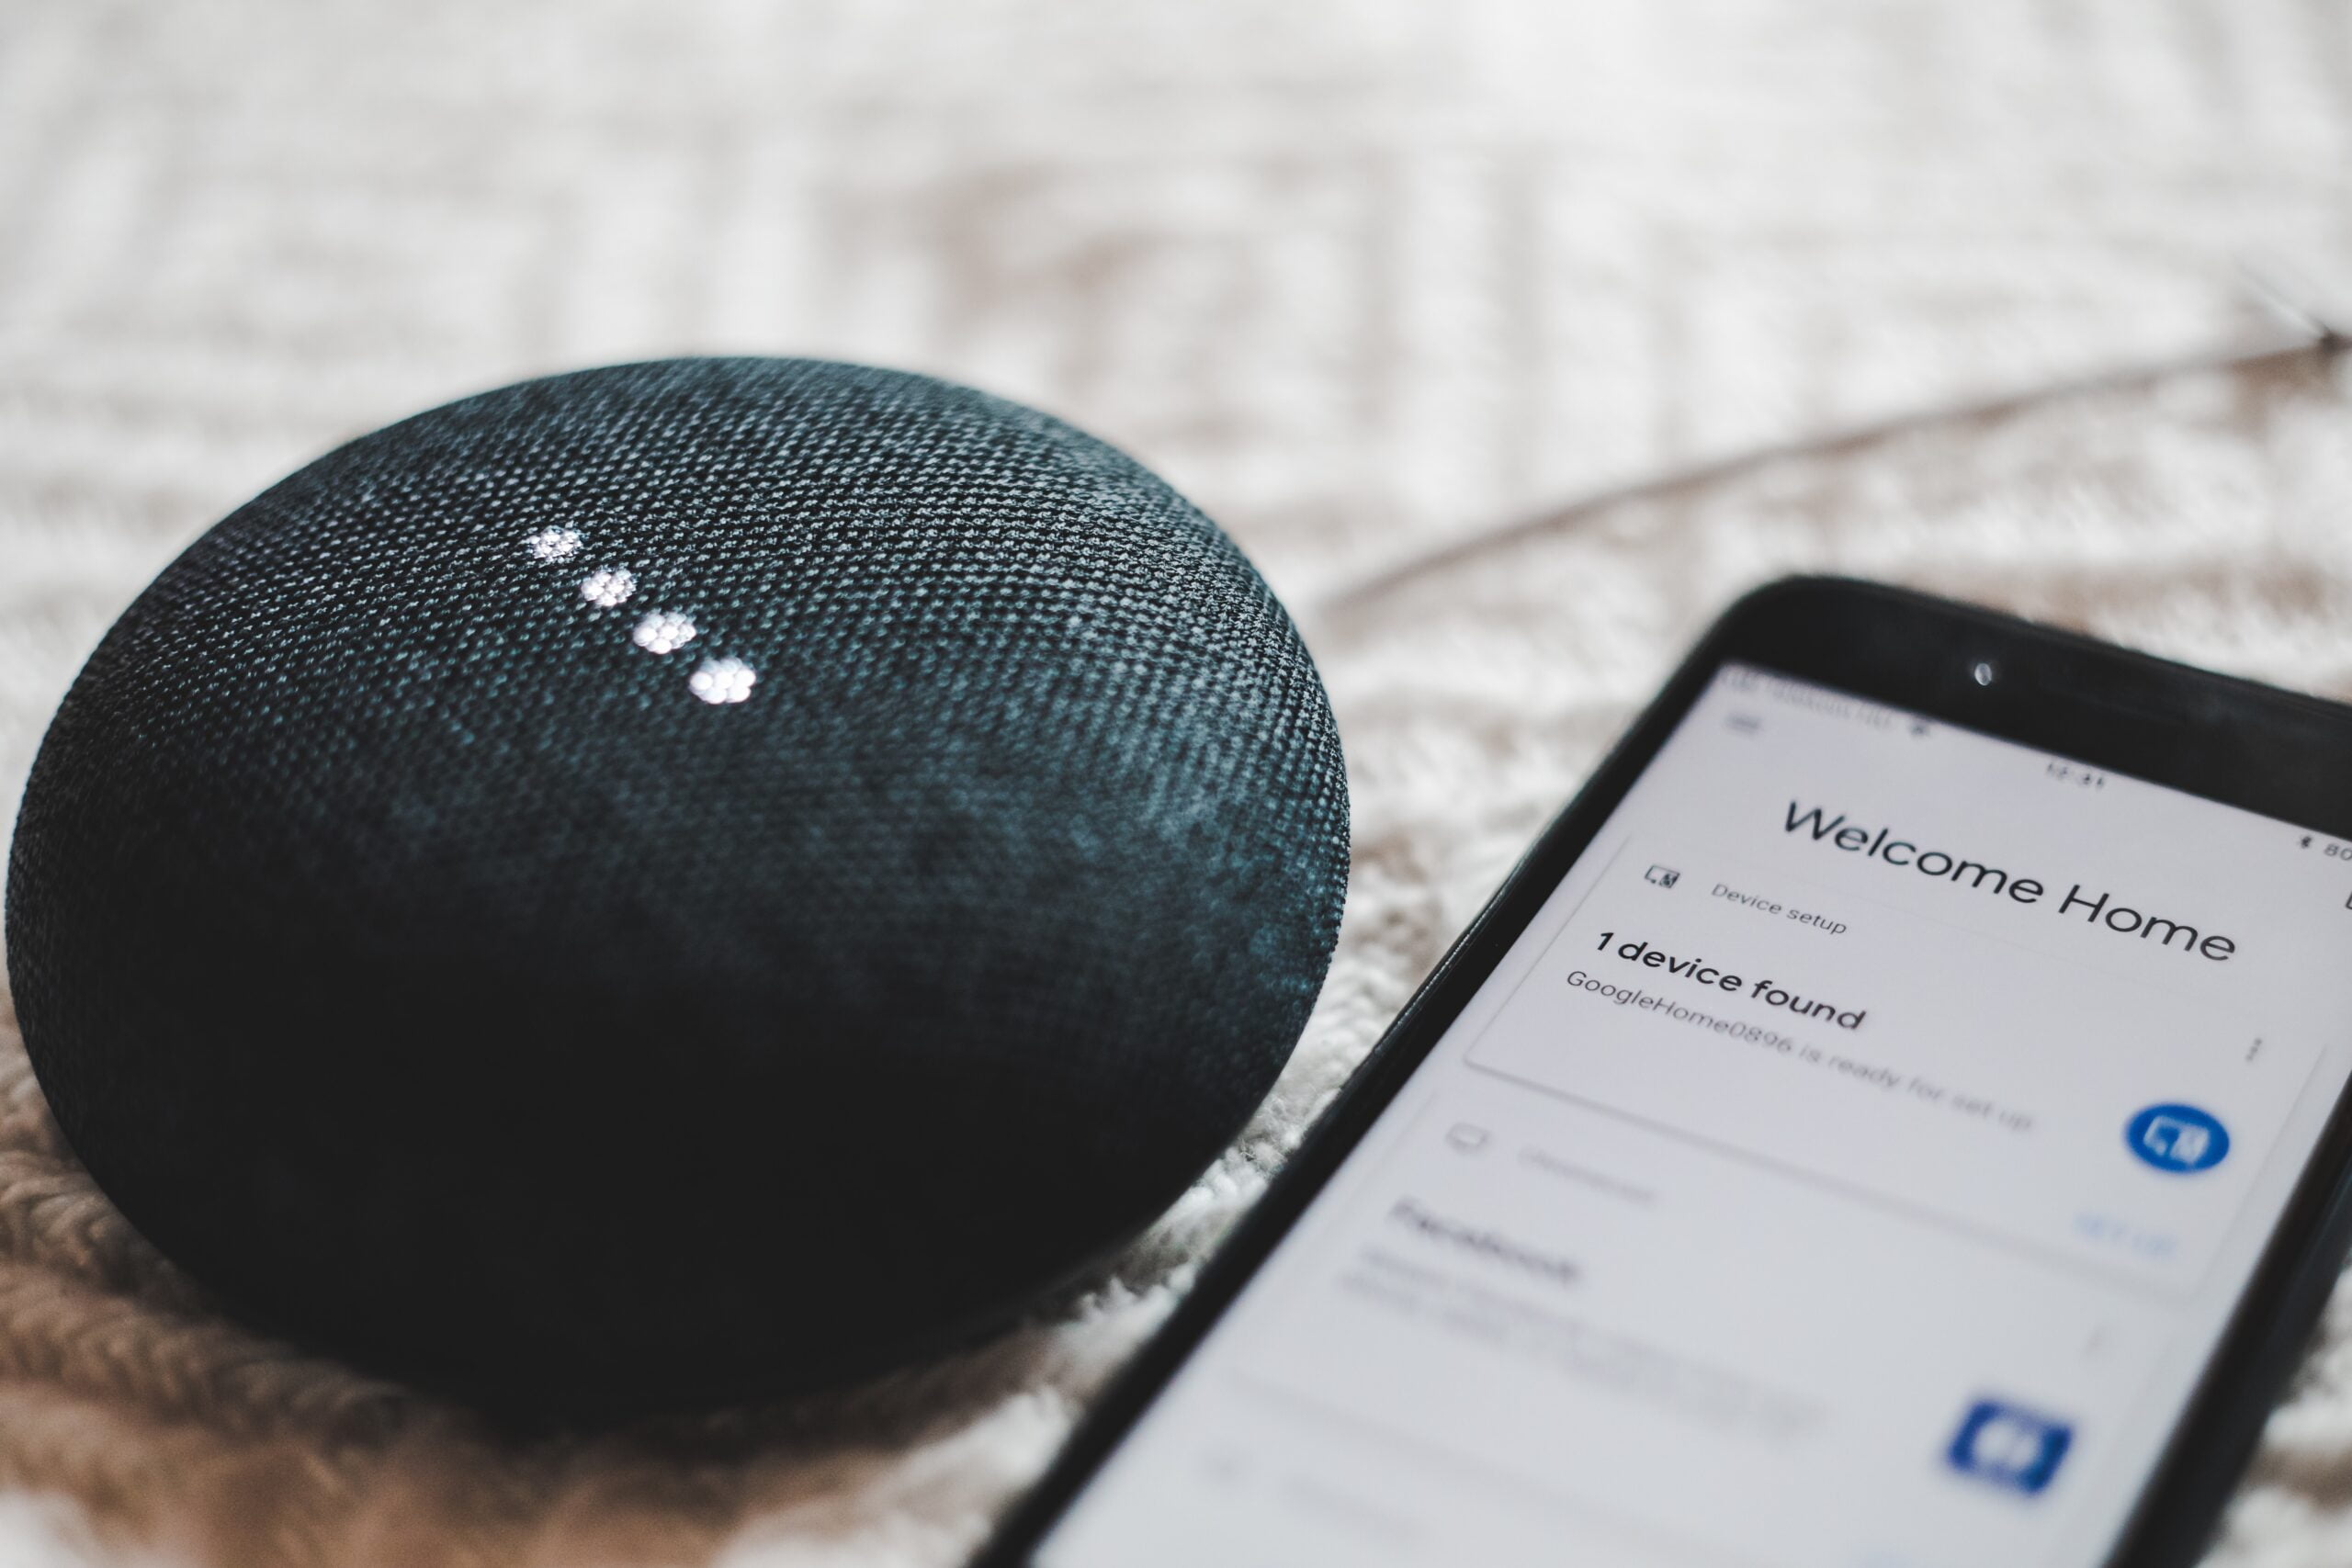 Google brings together dialog AI Bard and its Assistant – Report